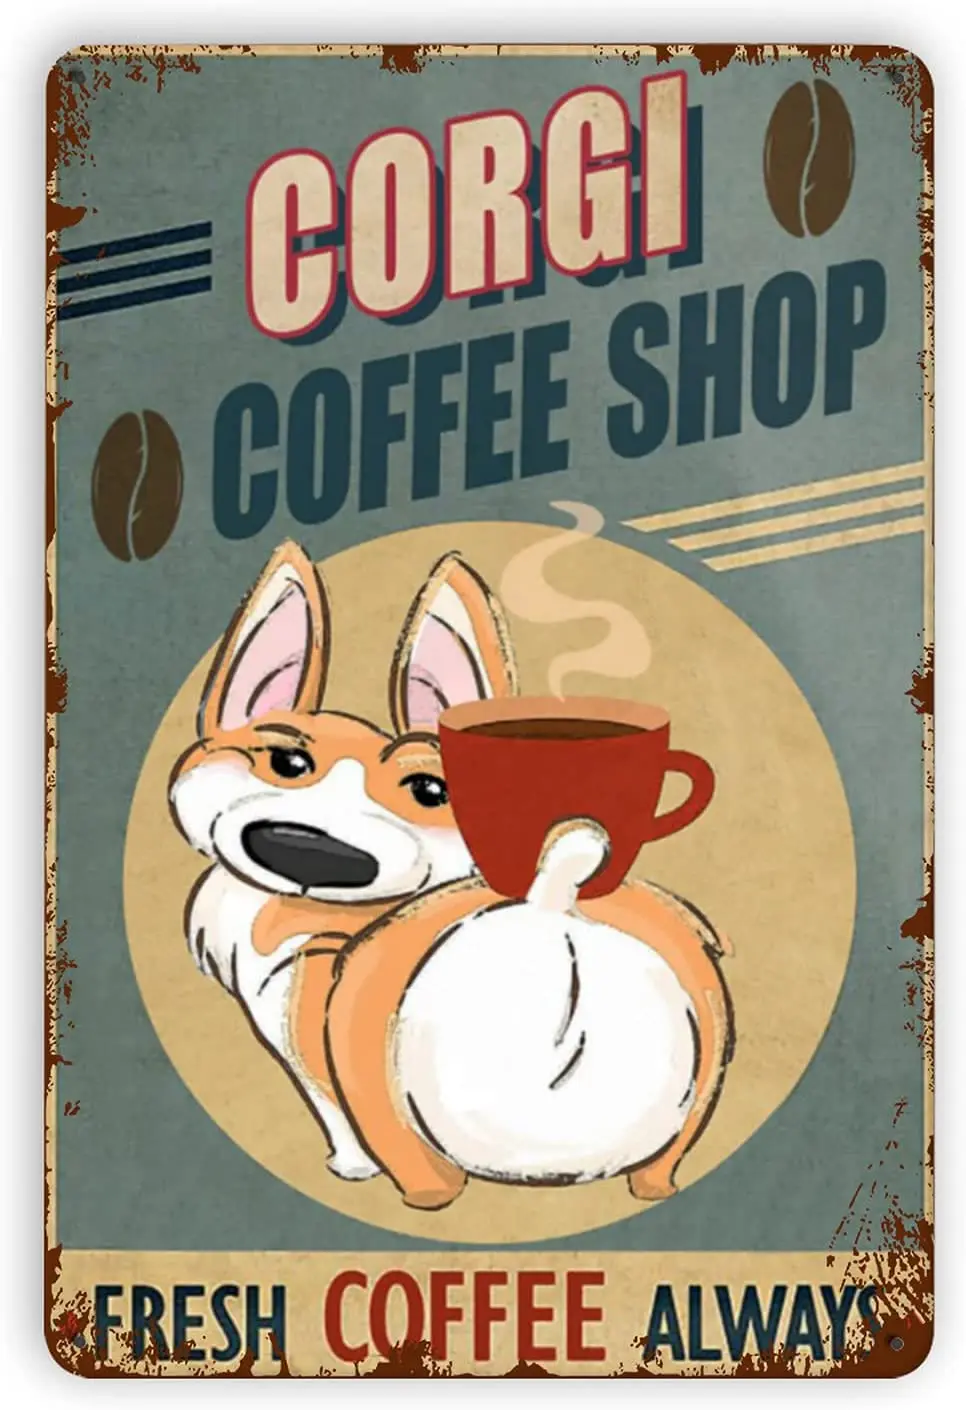 

Baby Kleidung Weant Metal Vintage Tin Signs Corgi Dog Coffee Funny Wall Decor for Home Bars Pubs Cafes Retro metal sign